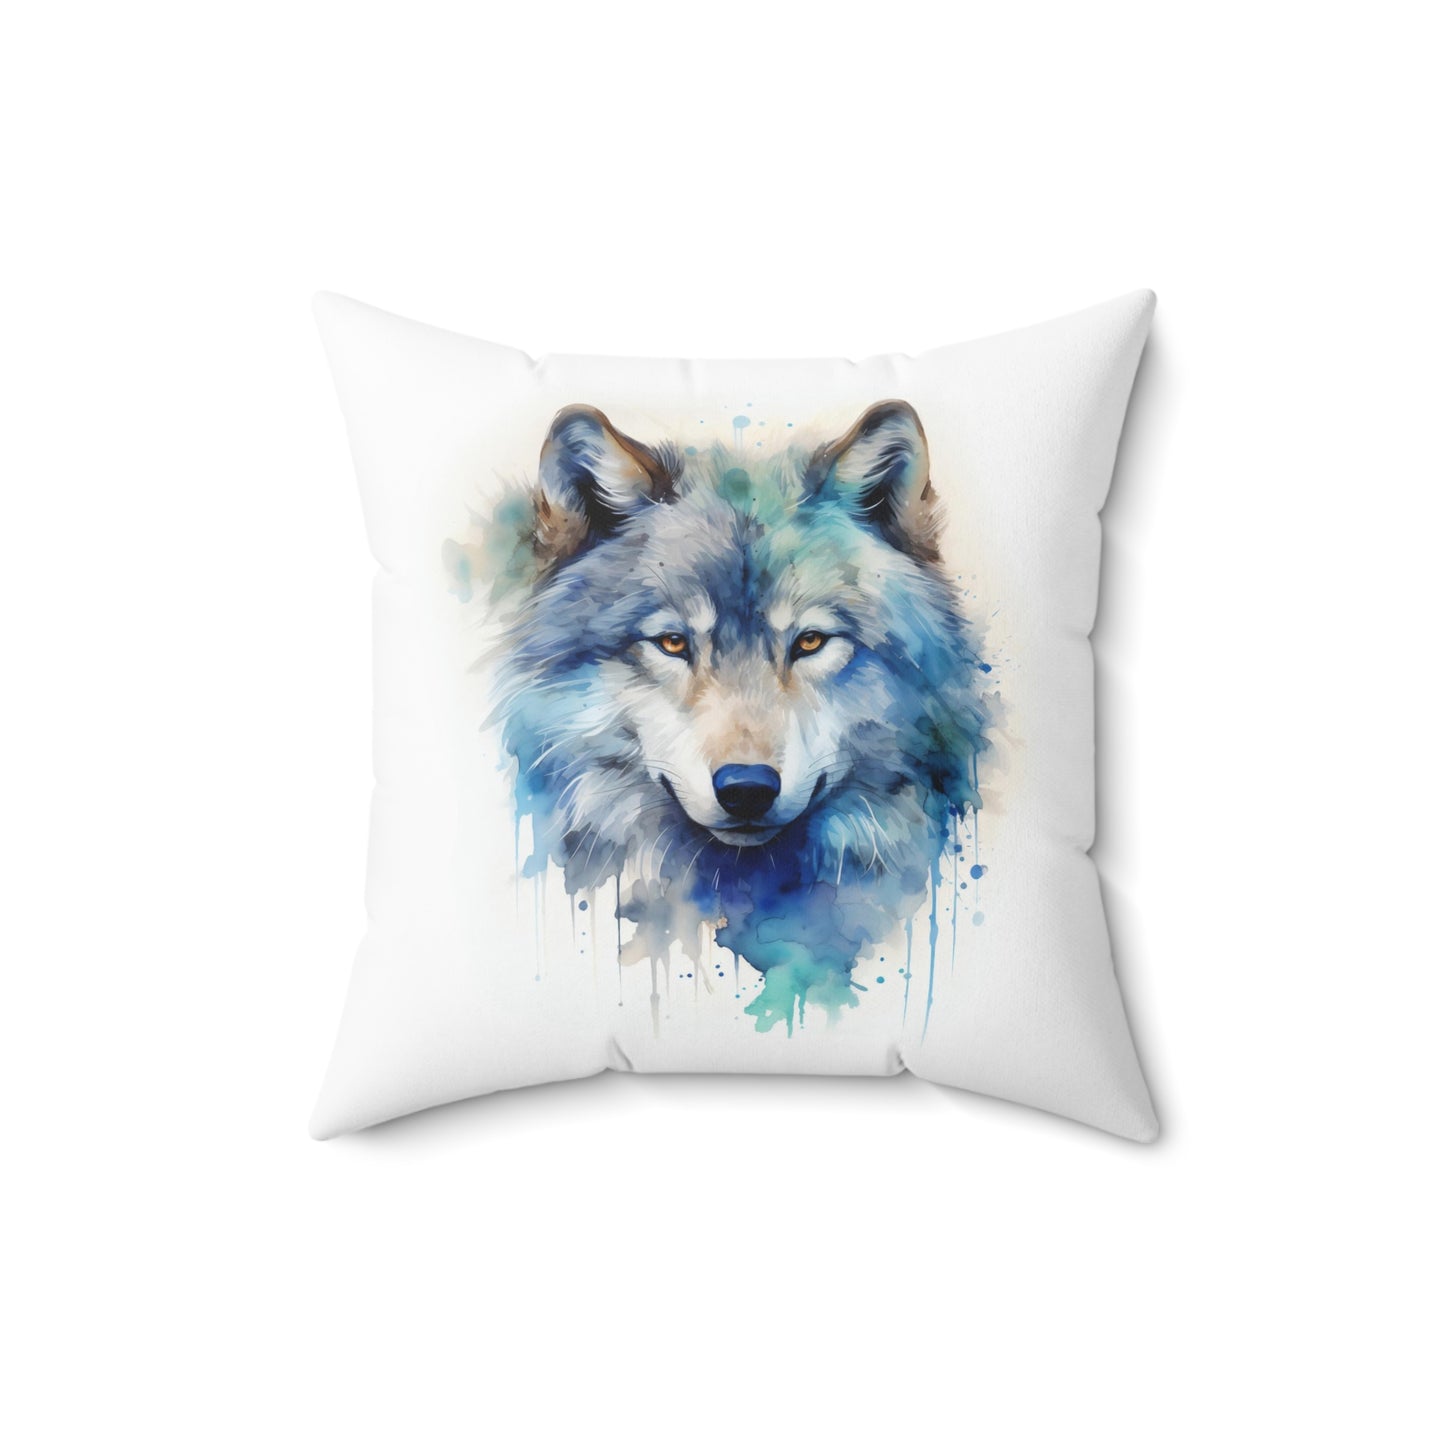 Wolf Throw Pillow, Watercolor Wolf Decorative Pillow, Square Animal Cushion, Double Sided Blue Accent Pillow, Concealed Zipper